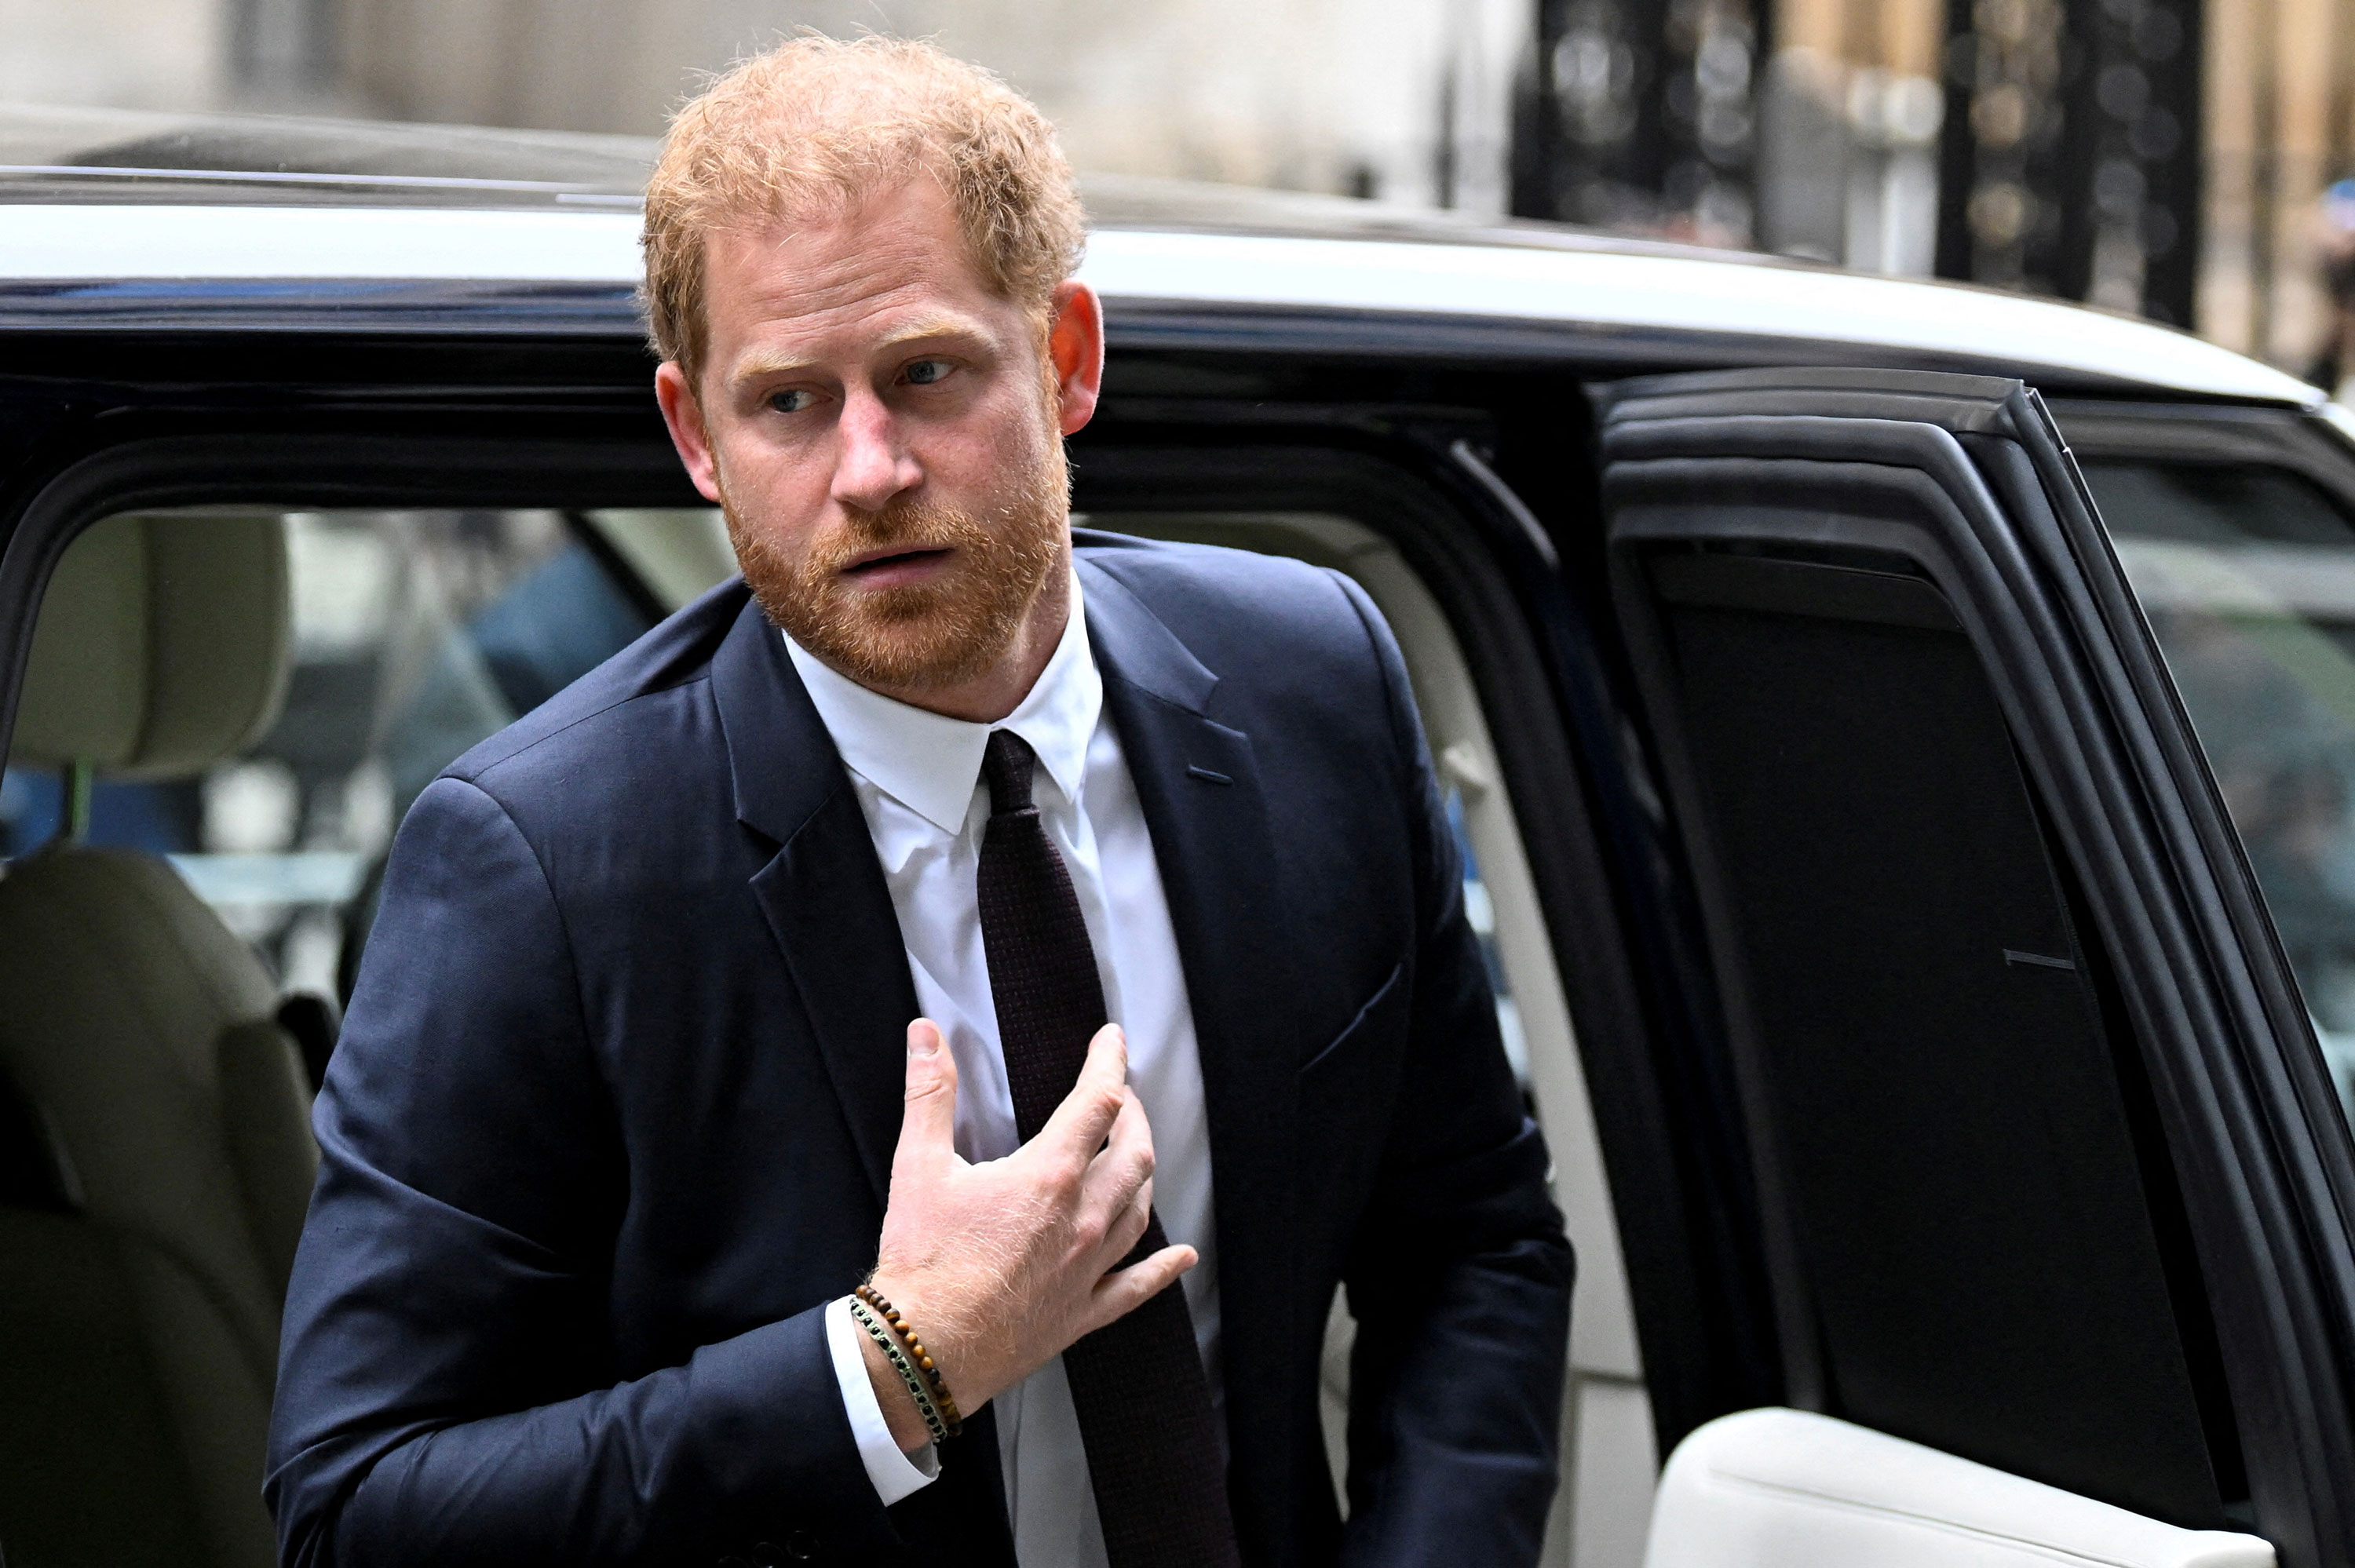 Prince Harry arrives at the Rolls Building of the High Court in London on Tuesday.